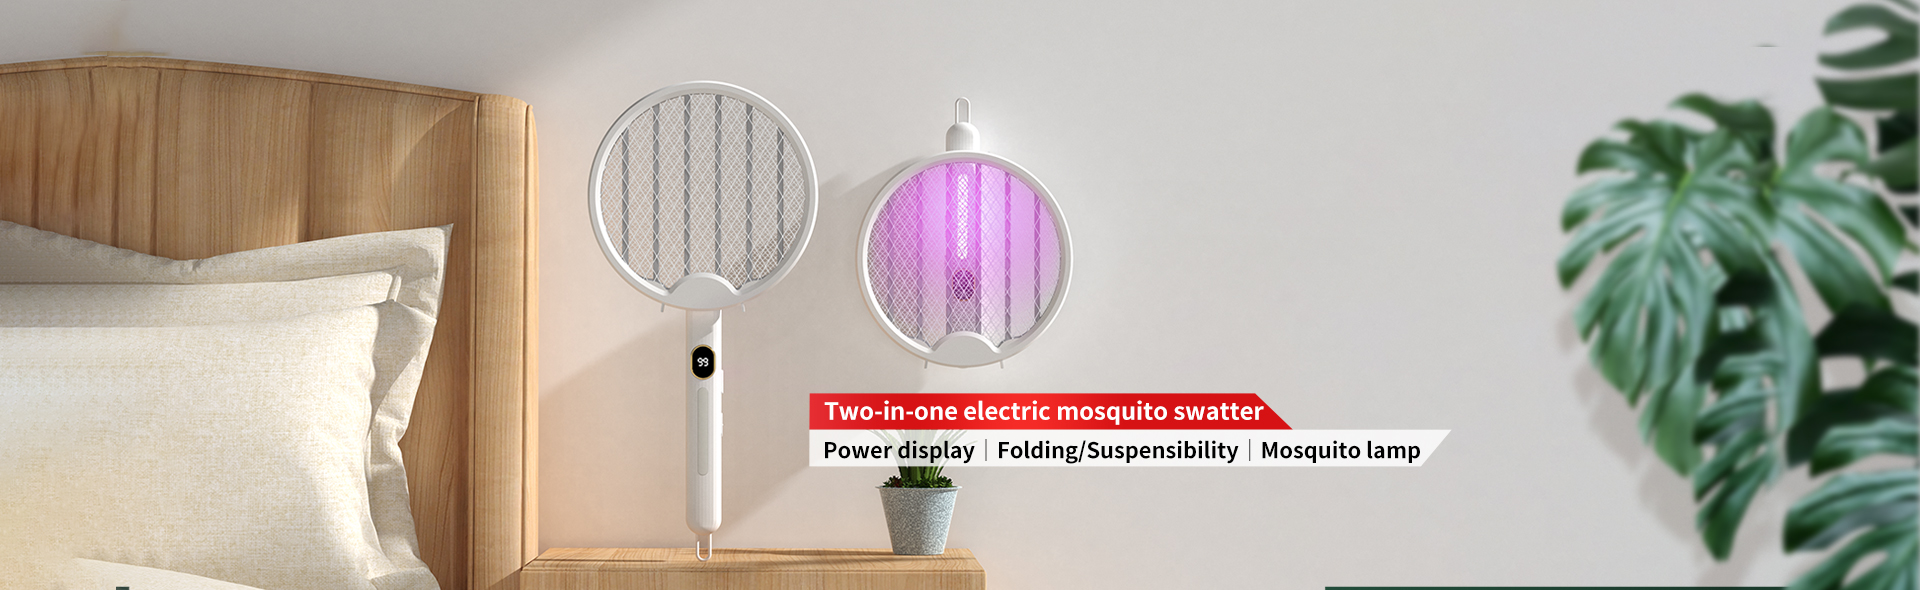 Two-in-one electric mosquito swatter